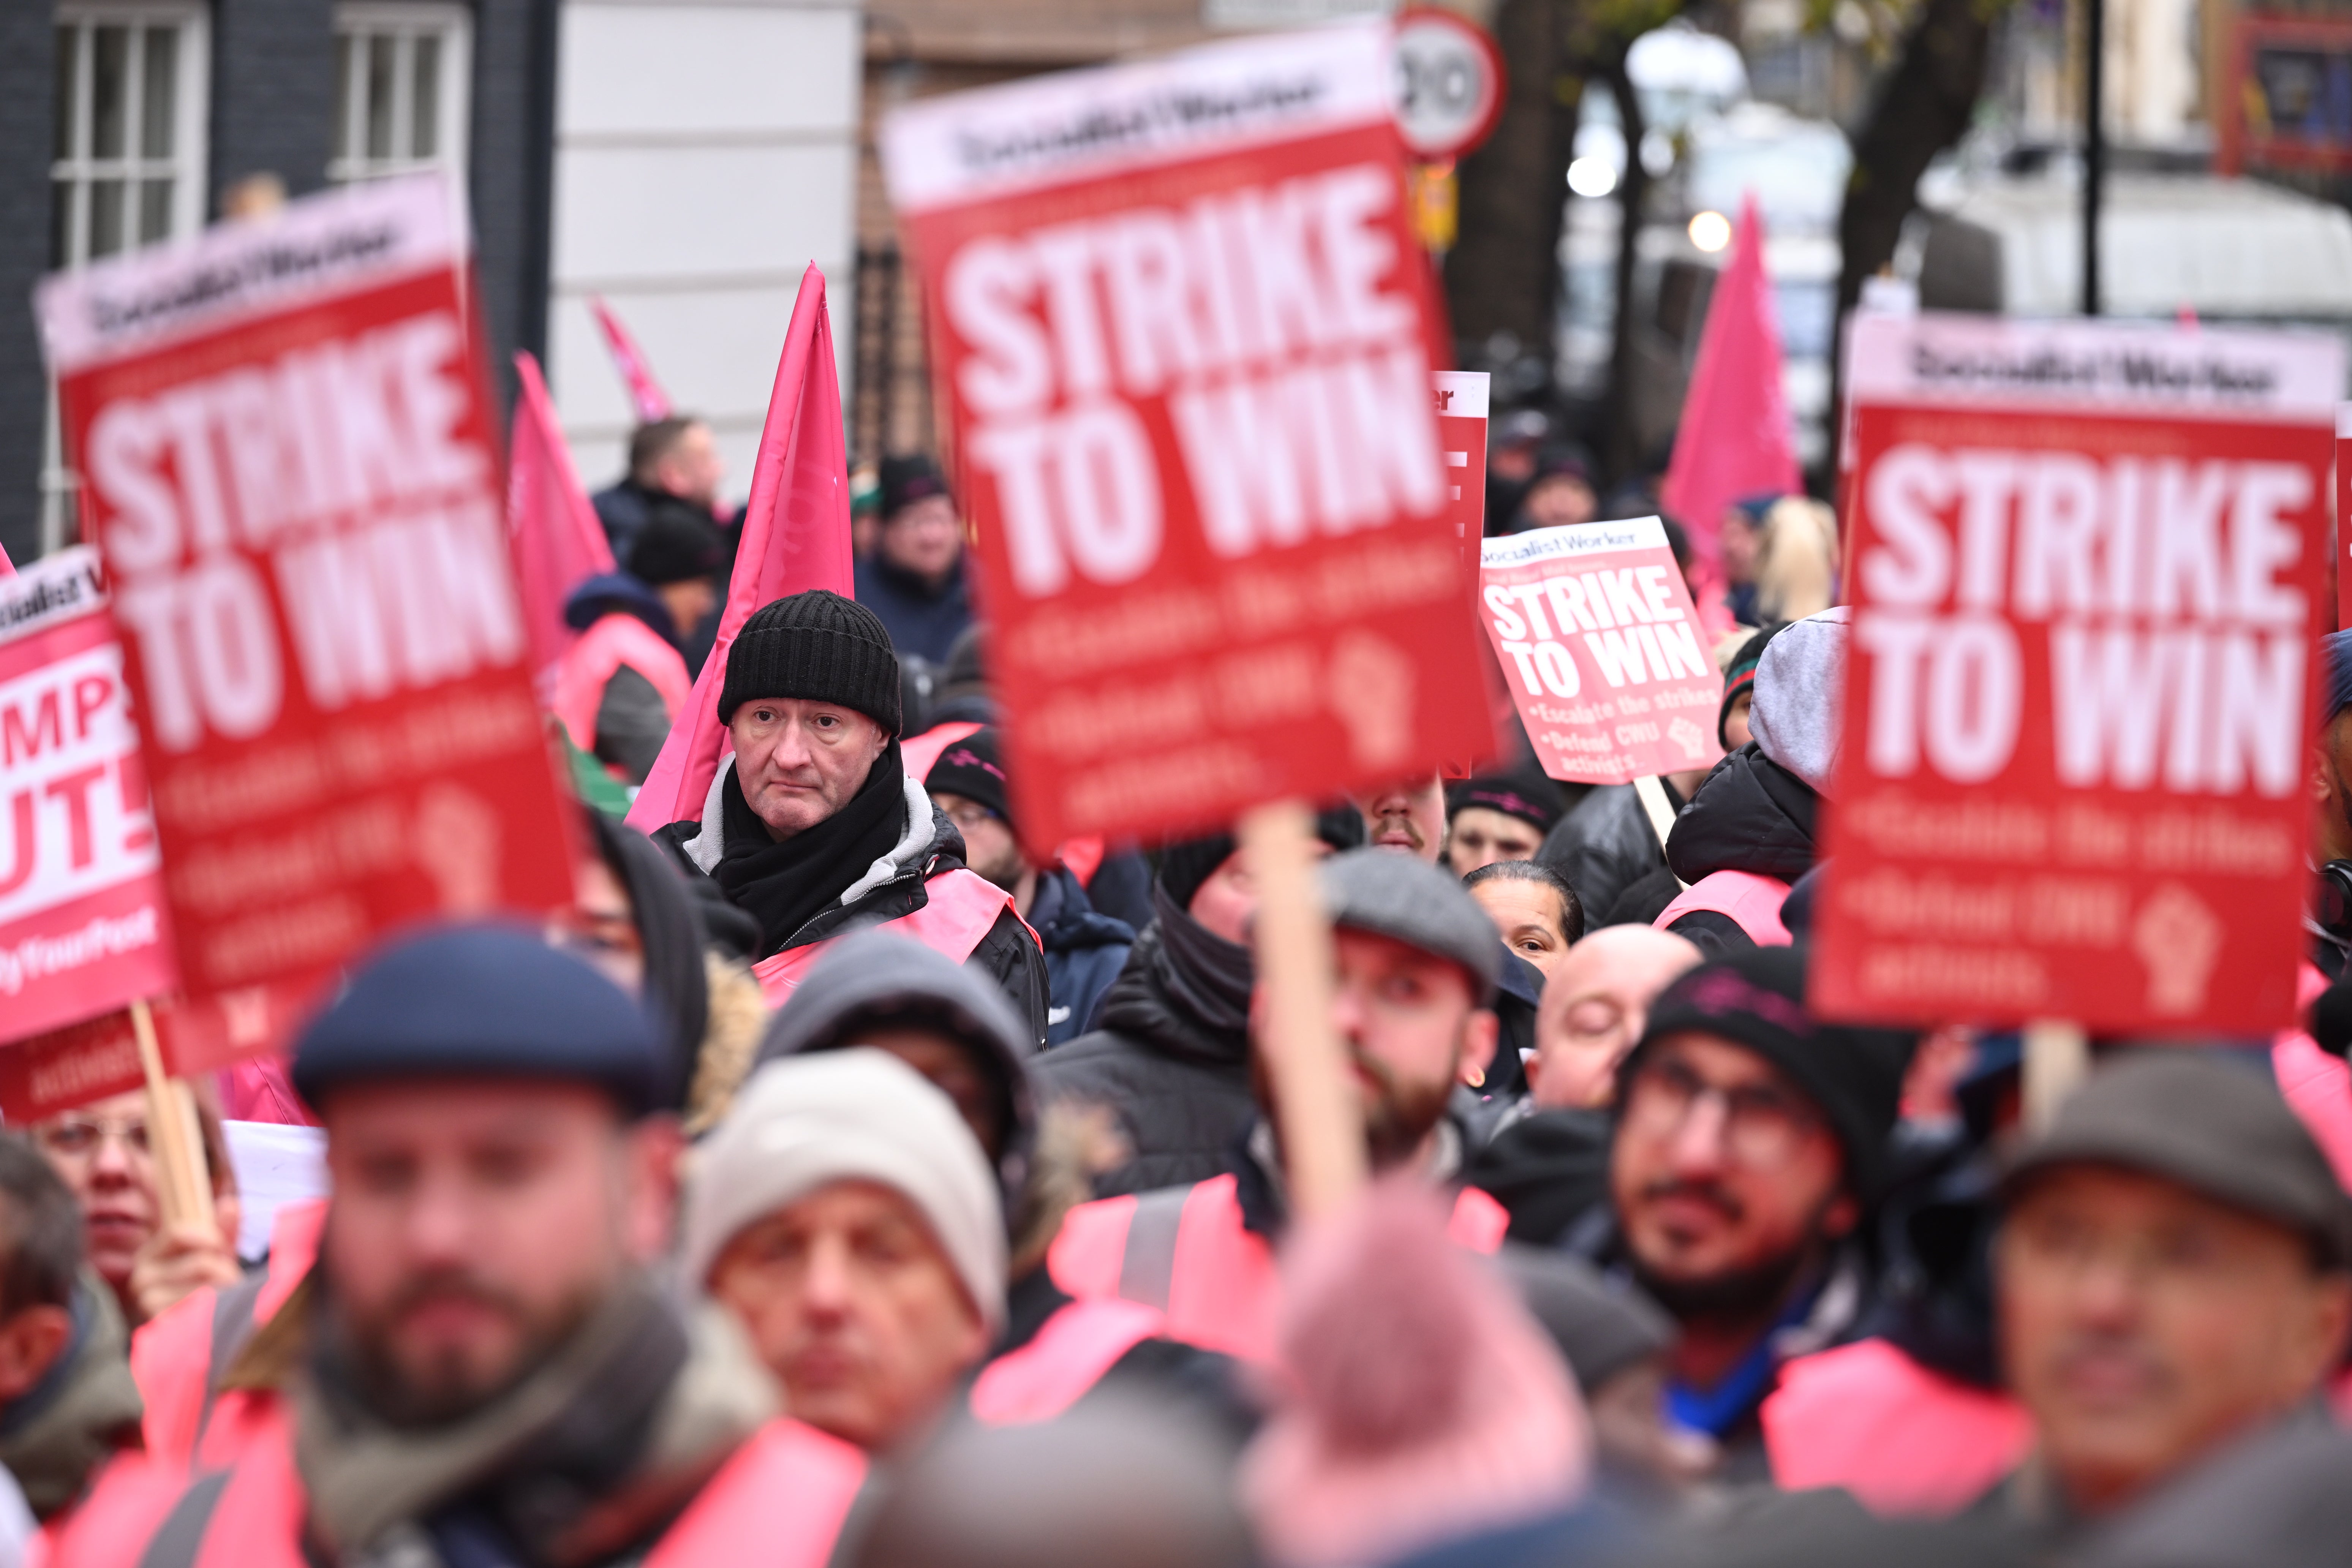 Striking mail workers and supporters march to Parliament Square on December 9, 2022